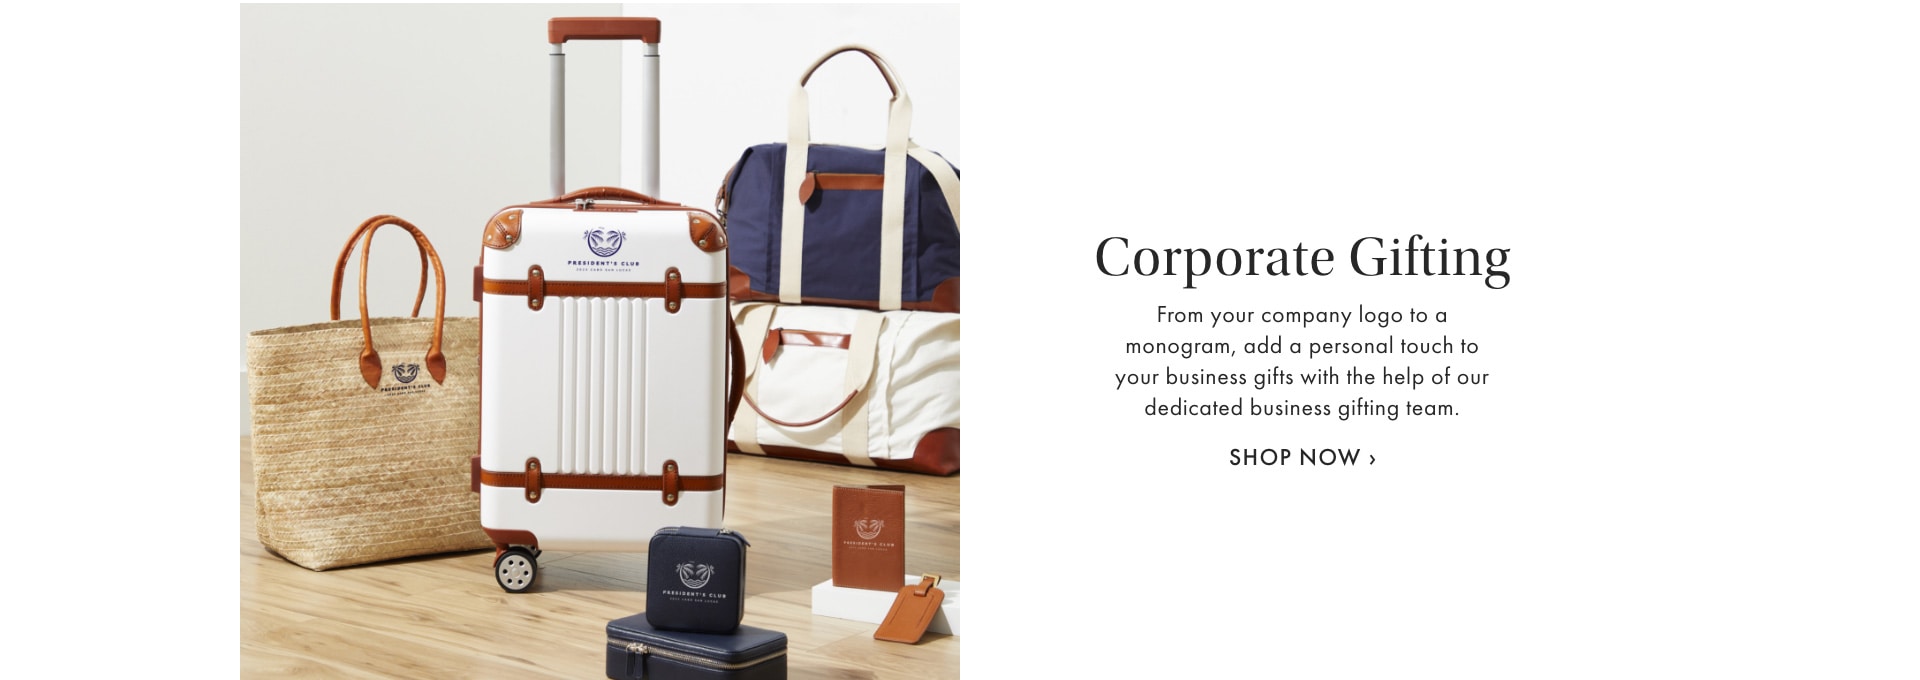 Corporate Gifting. Shop now >